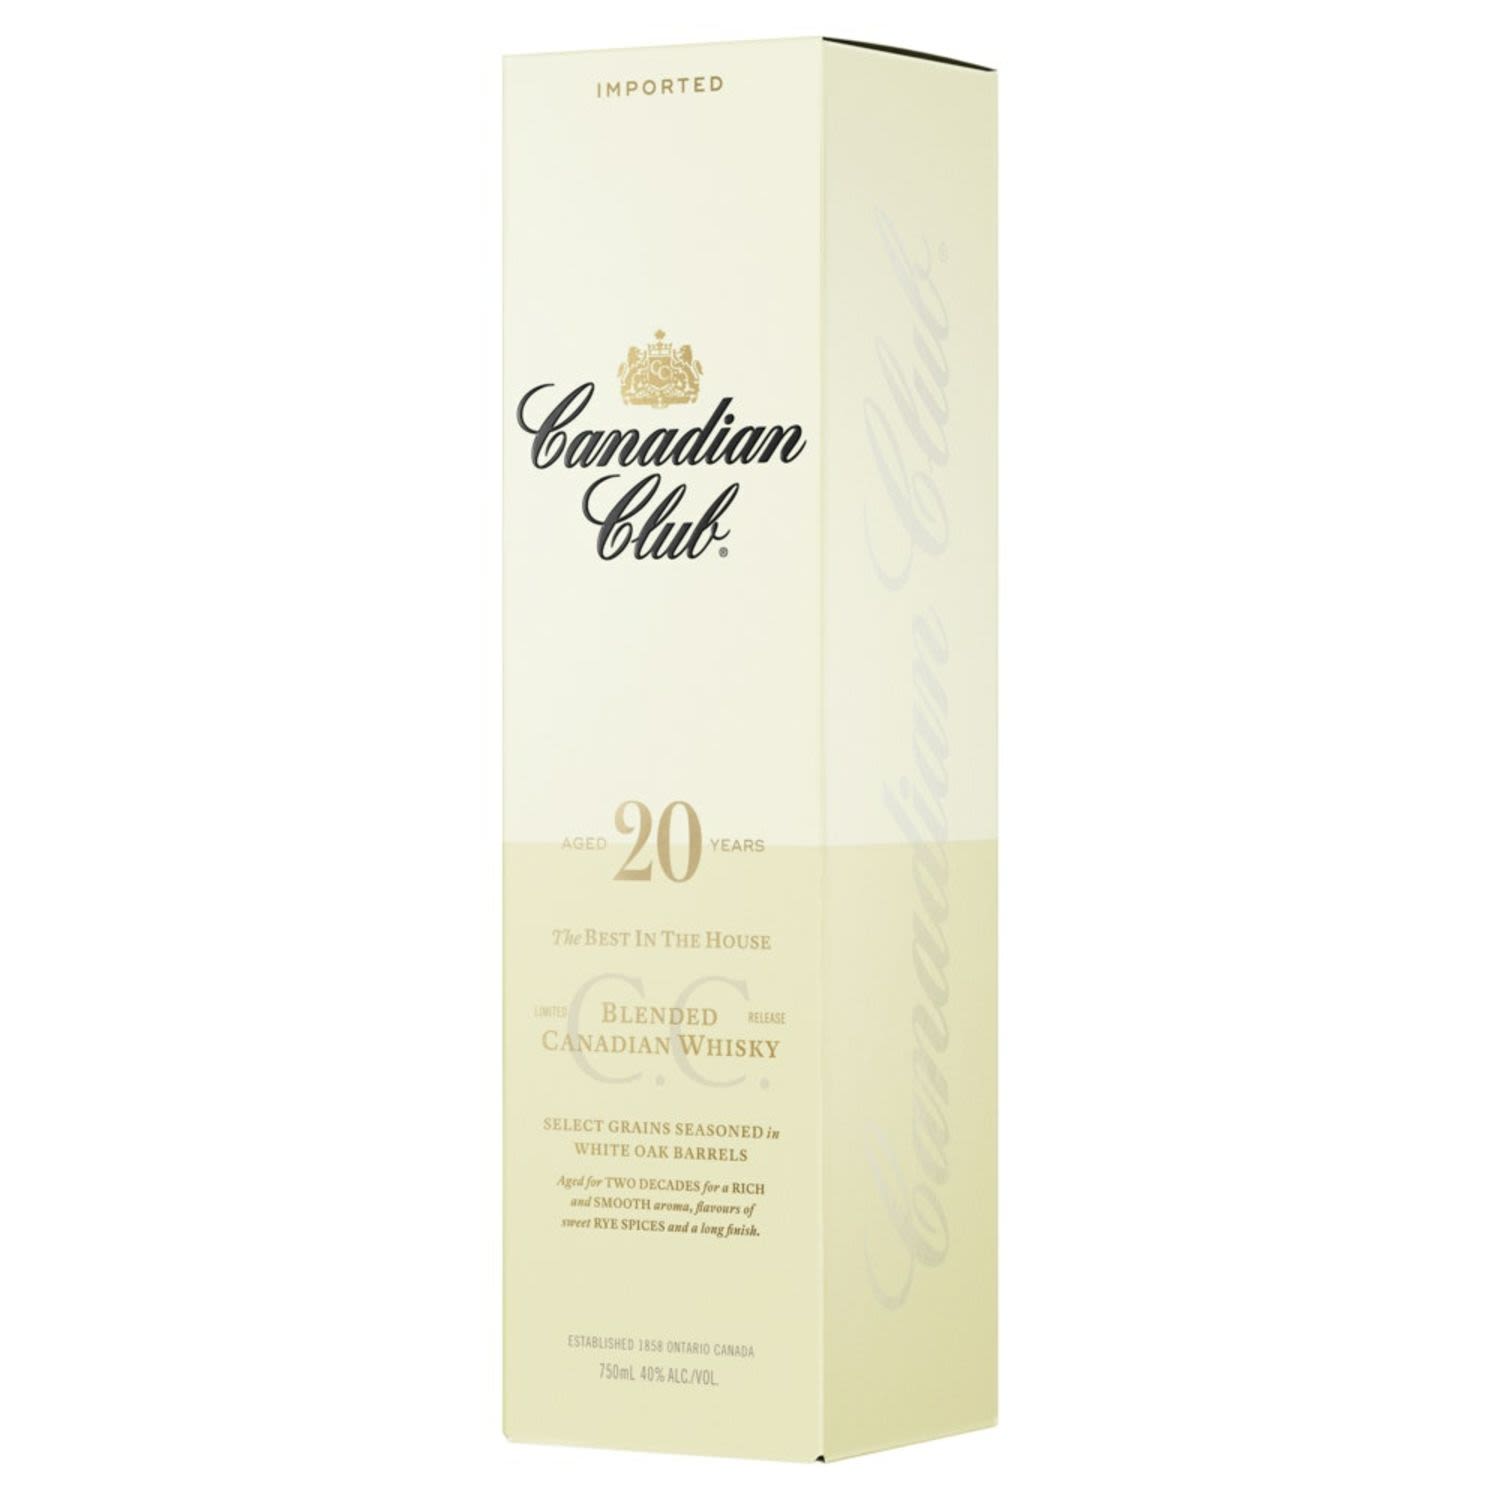 Canadian Club 20 Year Old Blended Canadian Whisky (750mL) Tasting note: Bright brassy gold. Well defined aromas of choc-caramel, fresh vanilla bean and creamy soda, follow through with a rich, creamy delivery that echoes the nose and adds creme caramel, hints of cinnamon toast and delicate orange zest.<br /> <br />Alcohol Volume: 40.00%<br /><br />Pack Format: Bottle<br /><br />Standard Drinks: 23.7</br /><br />Pack Type: Bottle<br /><br />Country of Origin: Canada<br />